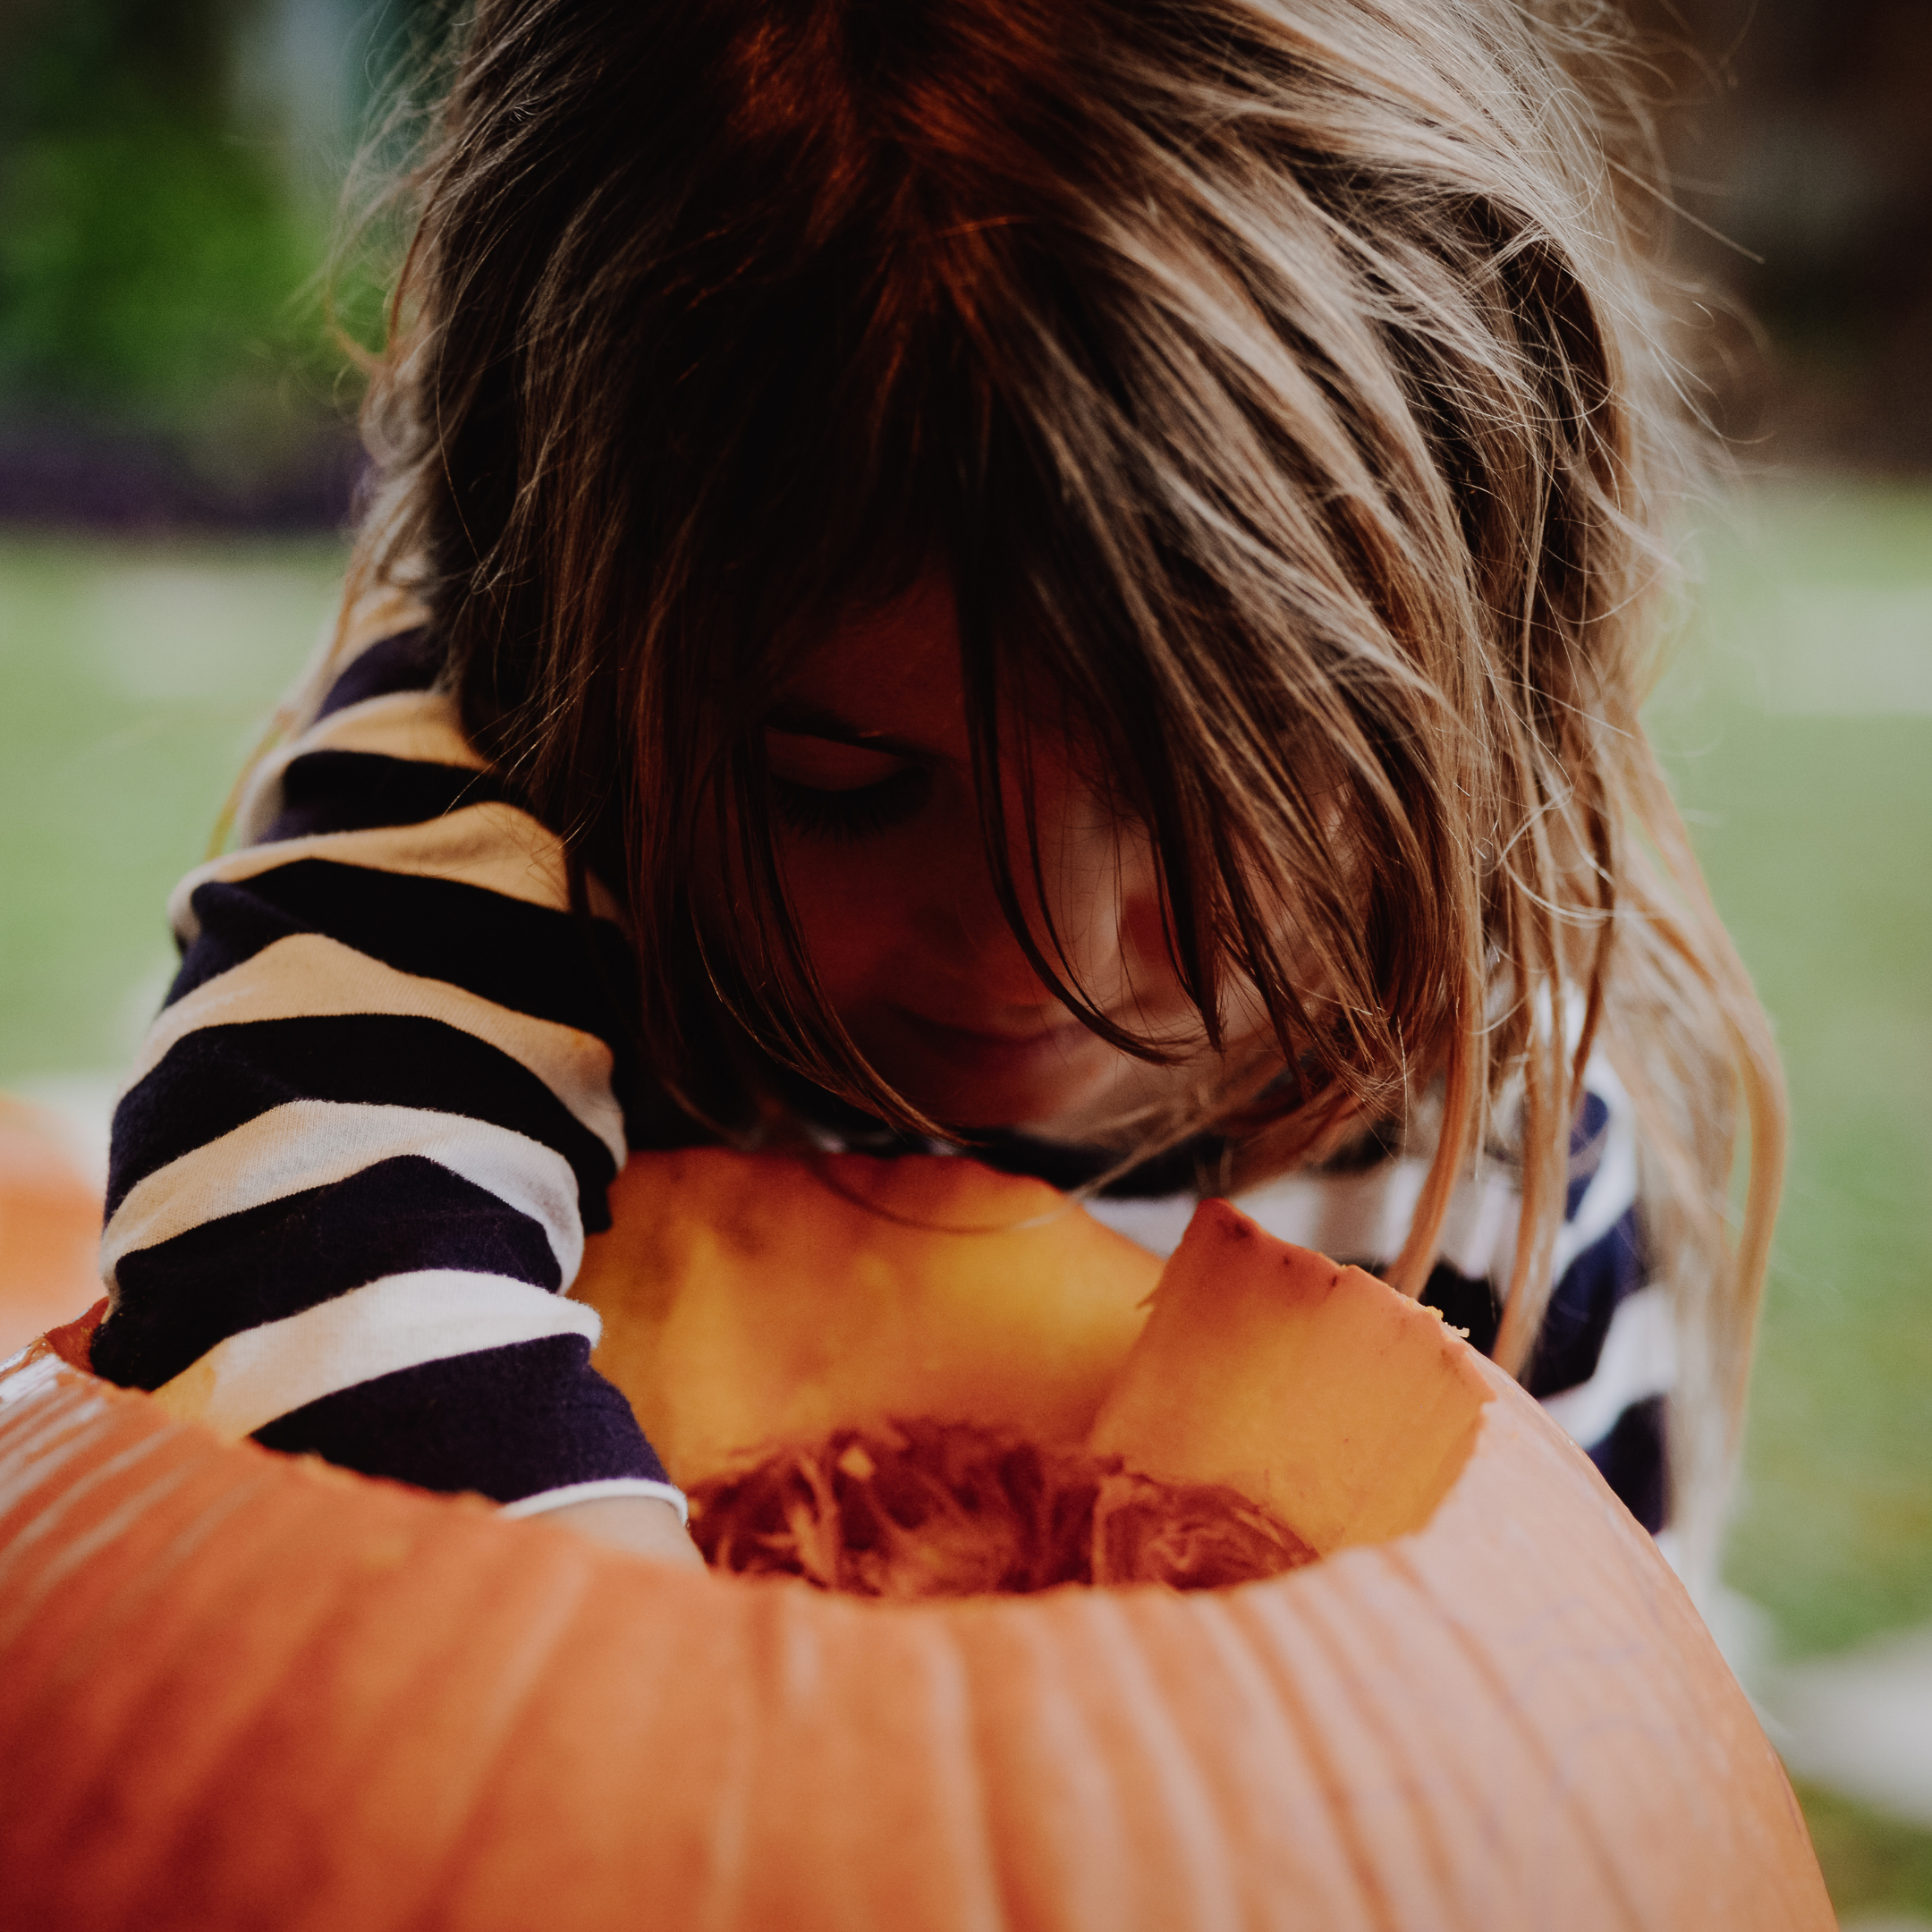 Child reaches arm into a large pumpkin to scoop out its seeds.